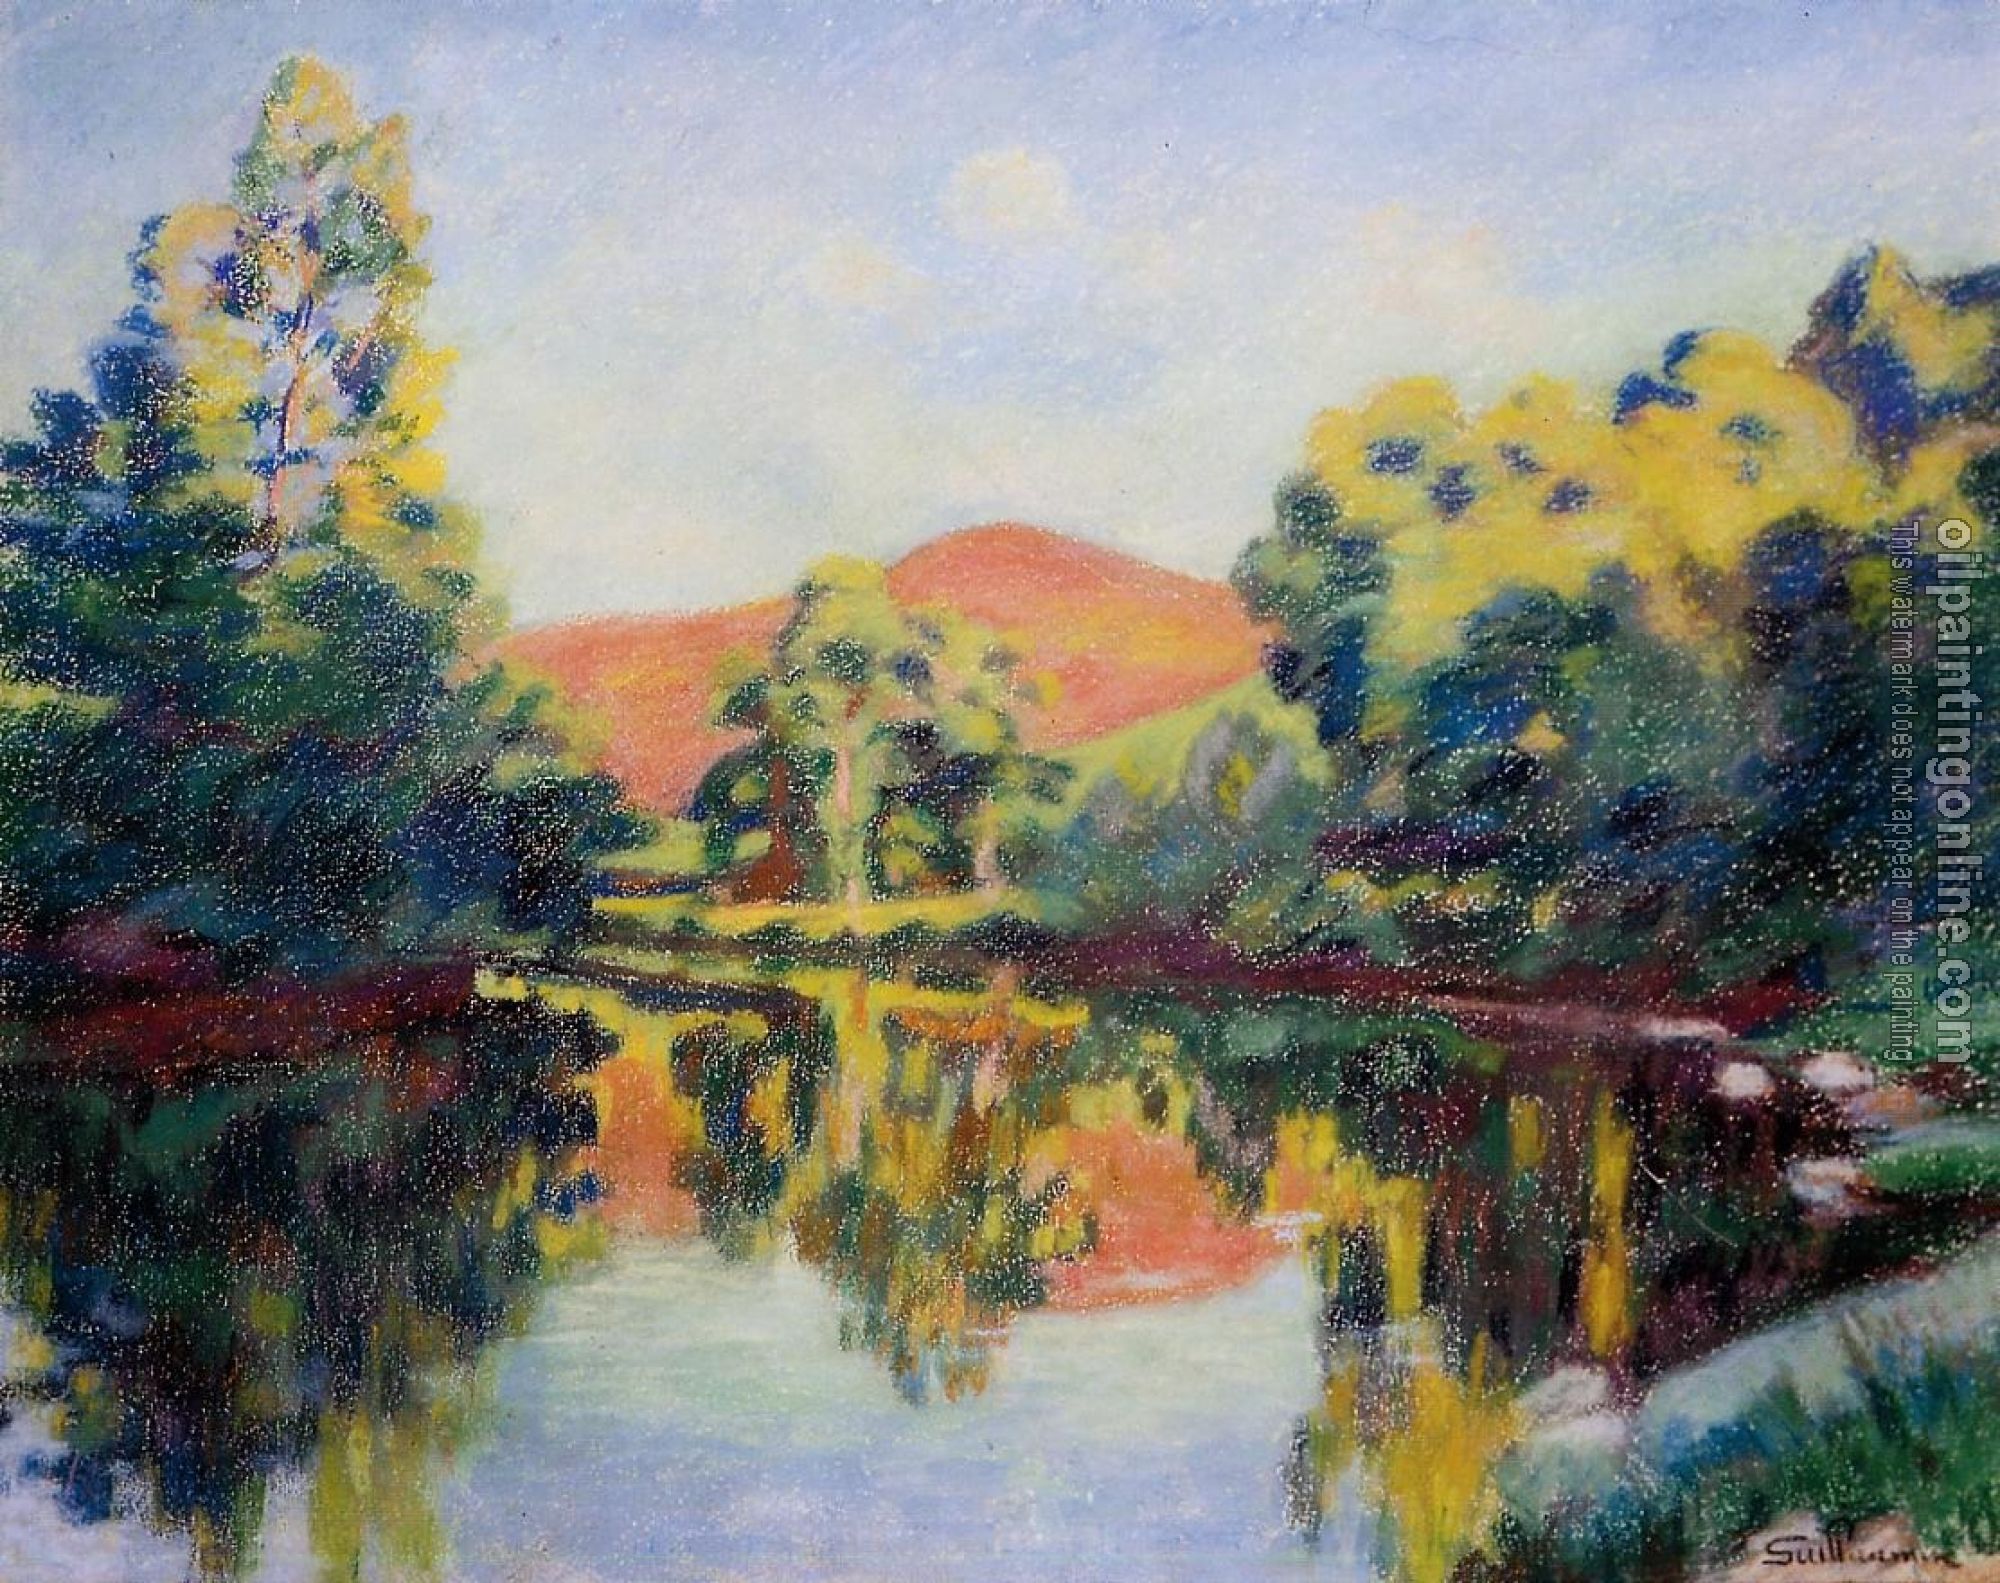 Guillaumin, Armand - The Pink Mountain